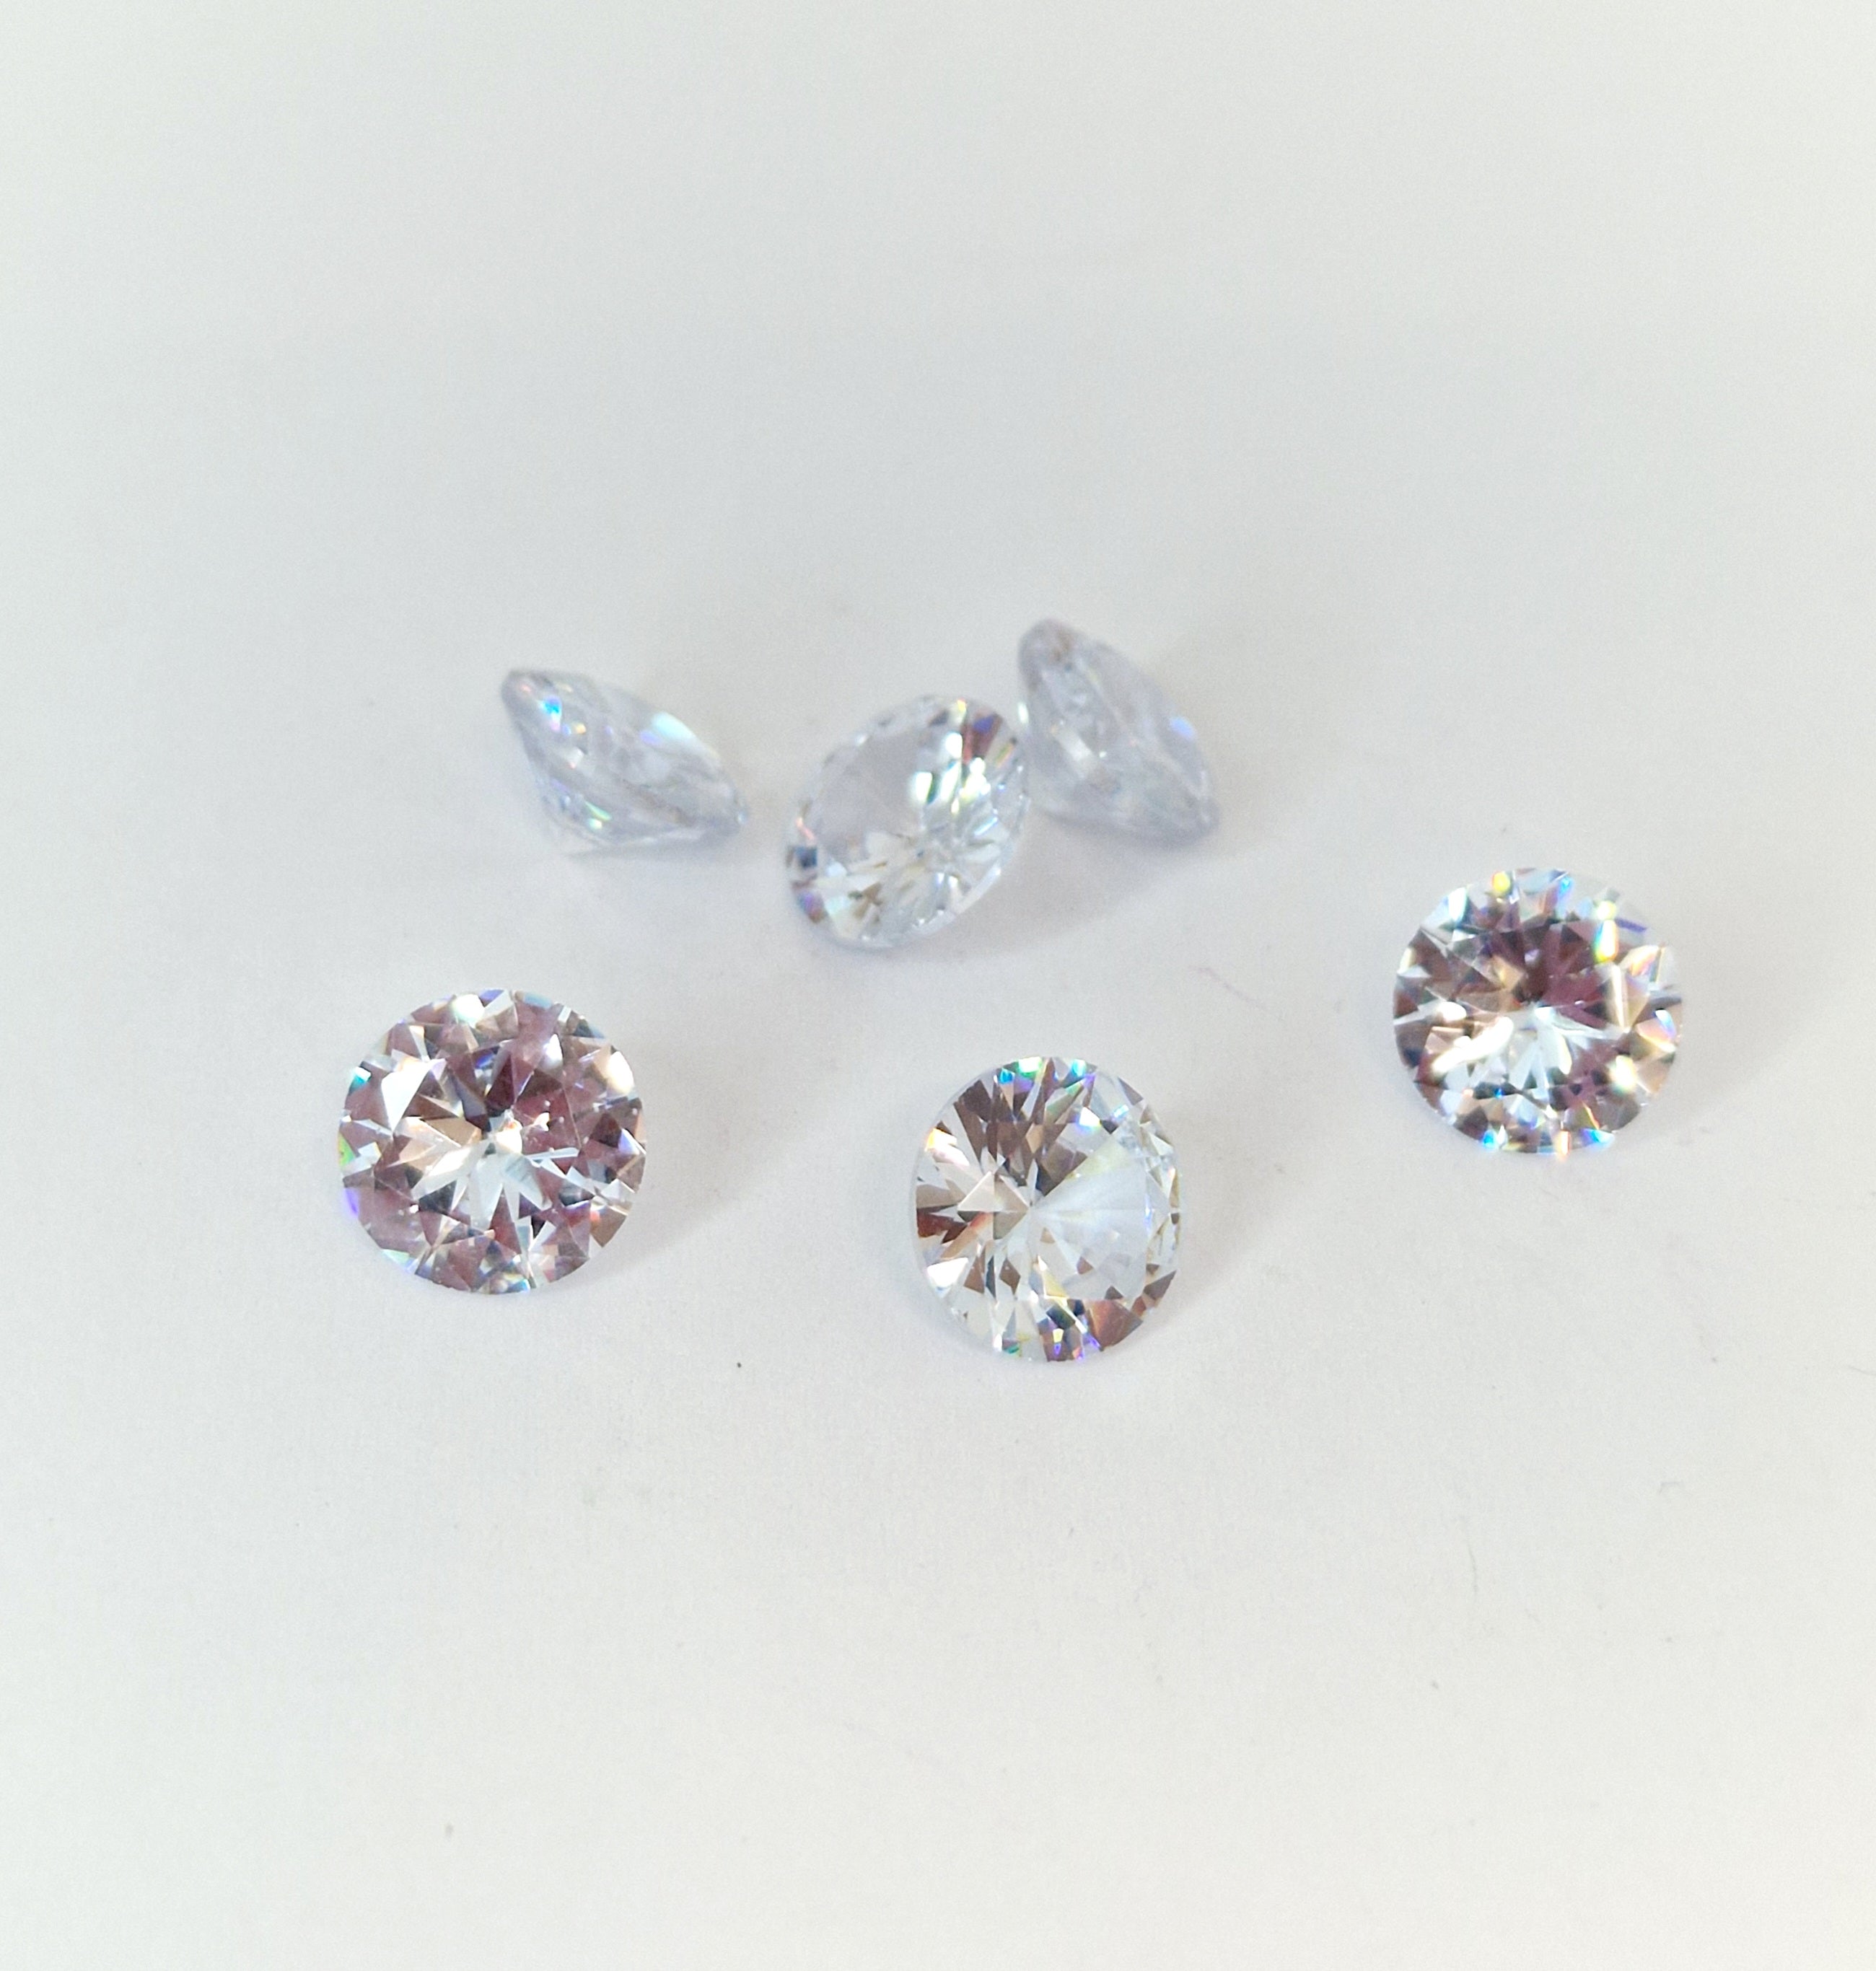 MajorCrafts 4pcs 12mm AAAAA (5A) Crystal Clear Round Point Back Cubic Zirconia Stones